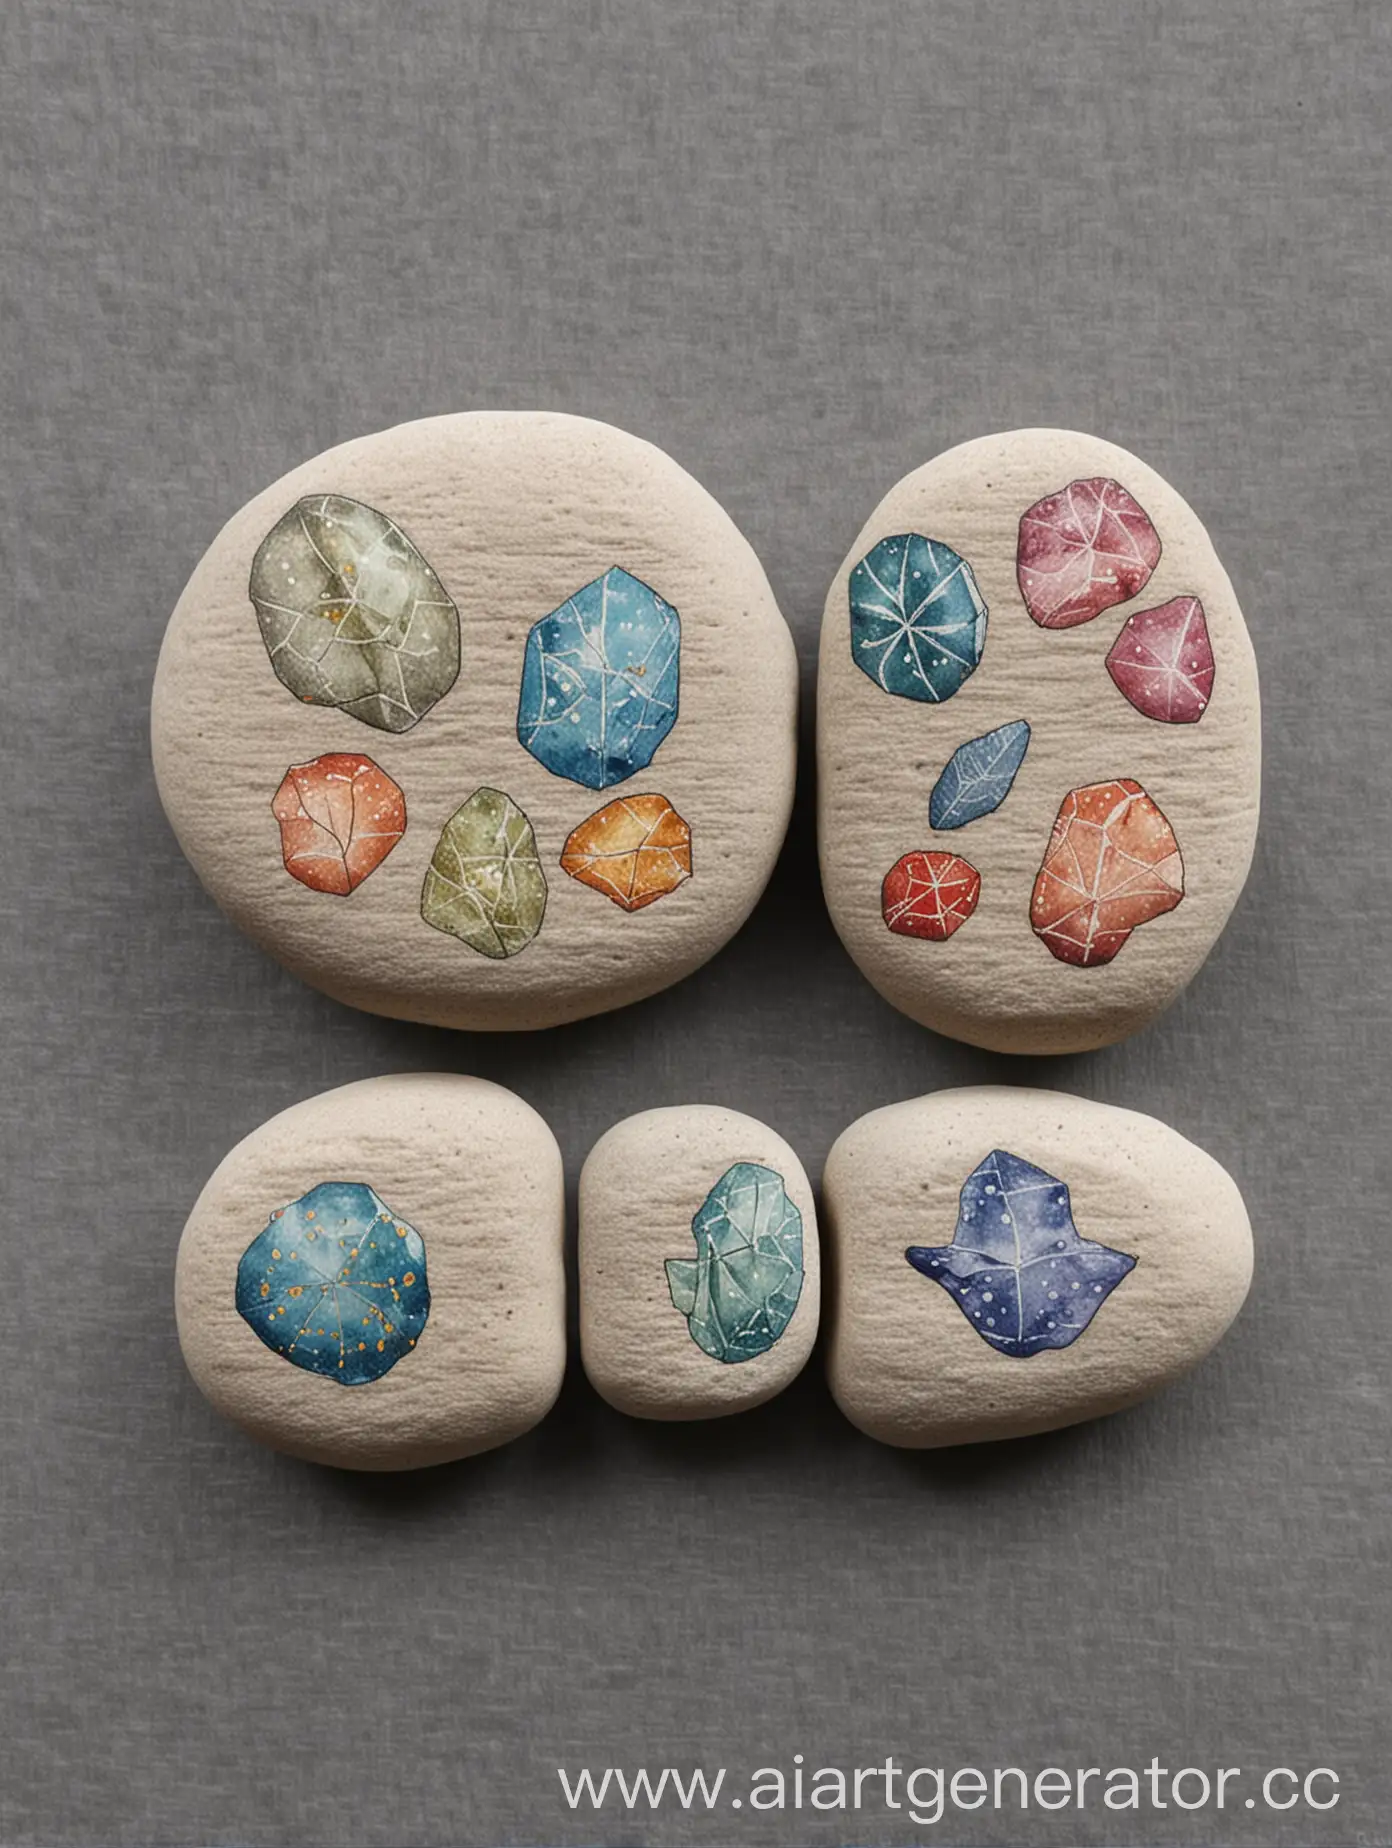 Artistic-Stones-Three-Pieces-with-Intricate-Drawing-Painting-and-Patterns